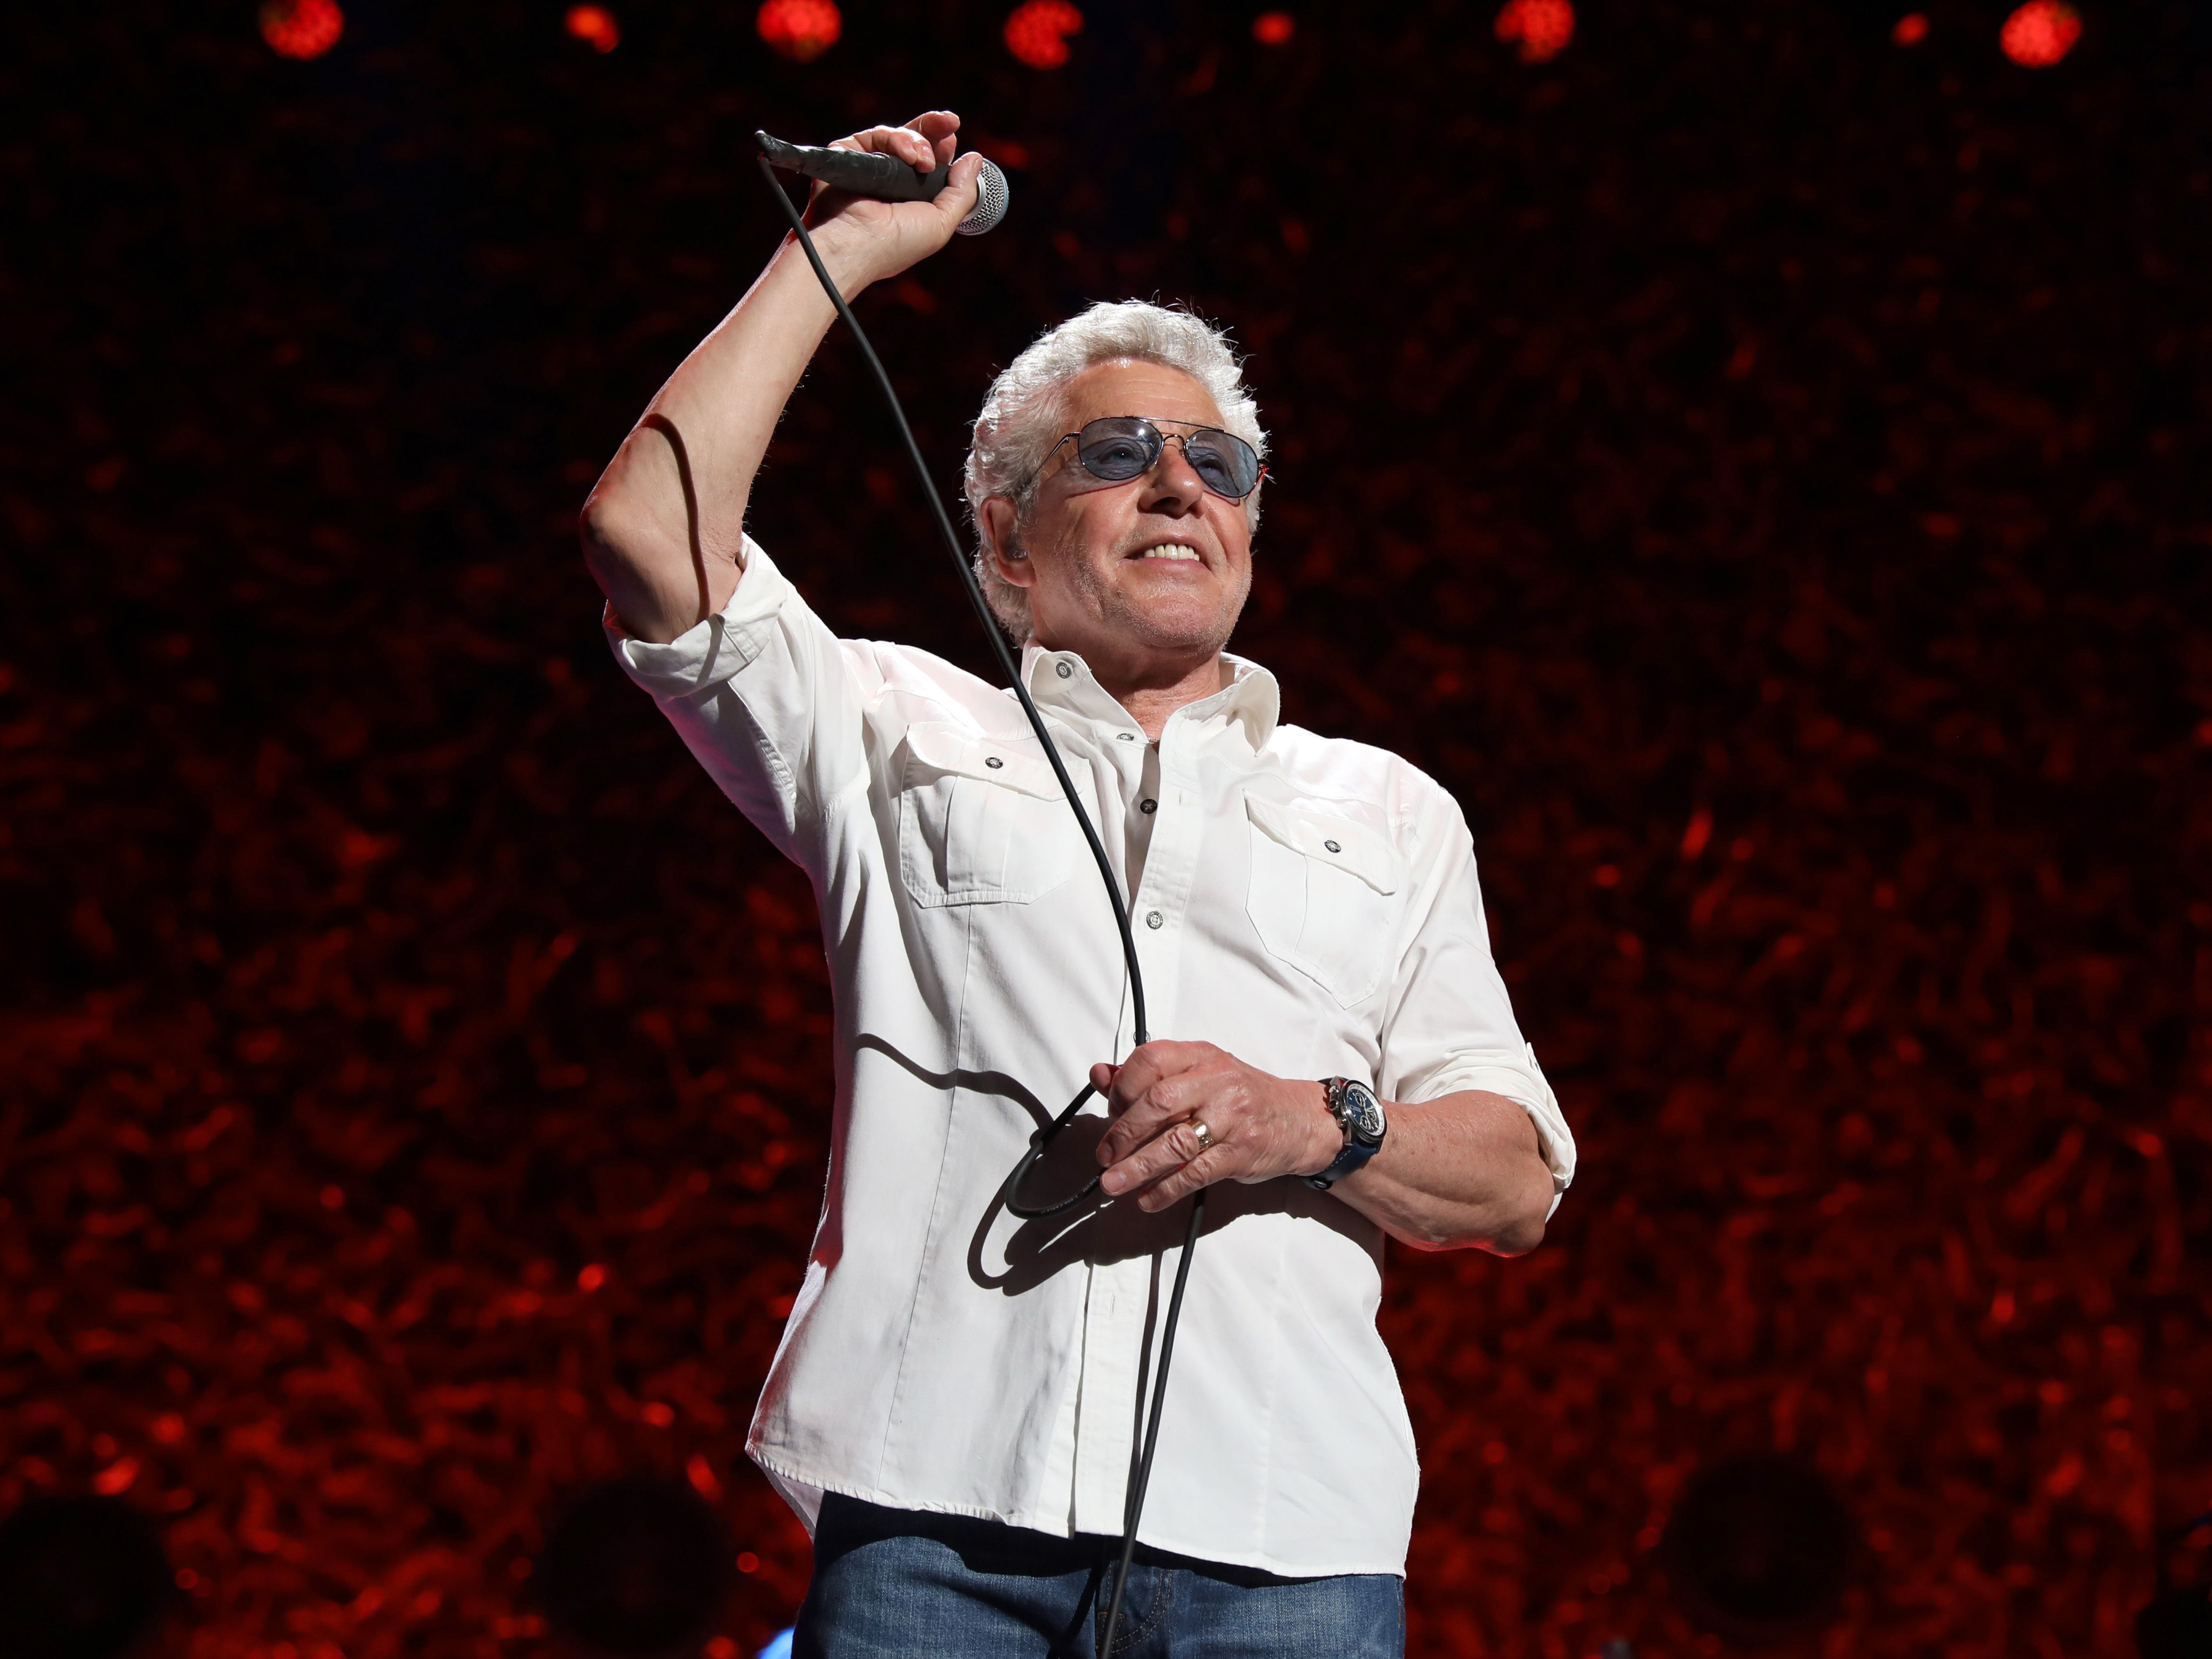 Roger Daltrey has stepped down from his role as Teenage Cancer Trust curator